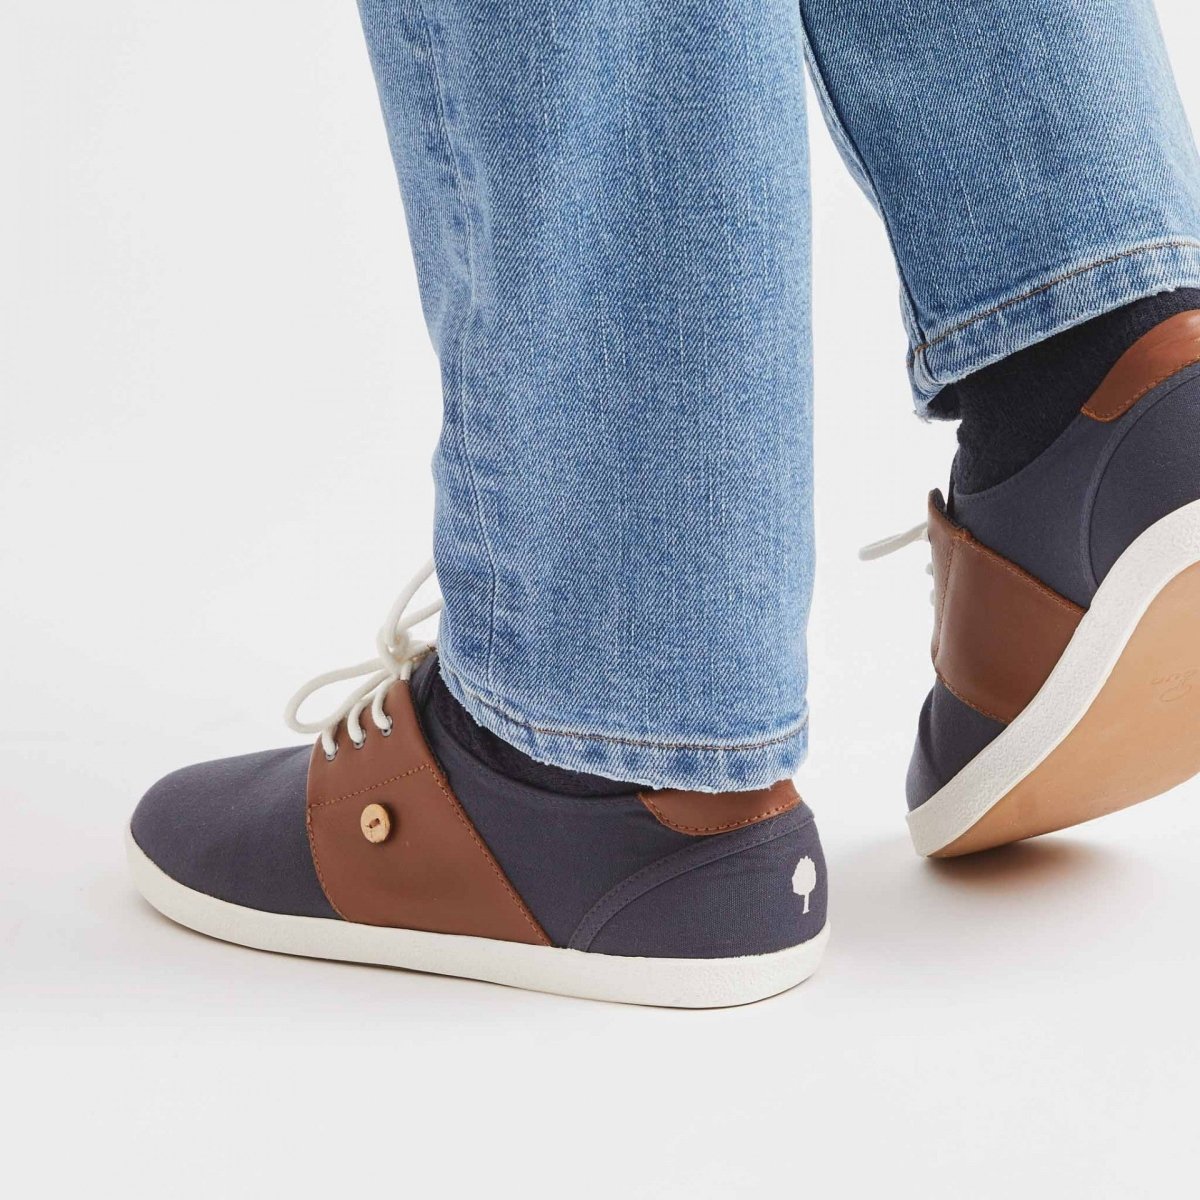 Cypress - Navy and Tawny Cotton and Leather Trainer - Good Chic